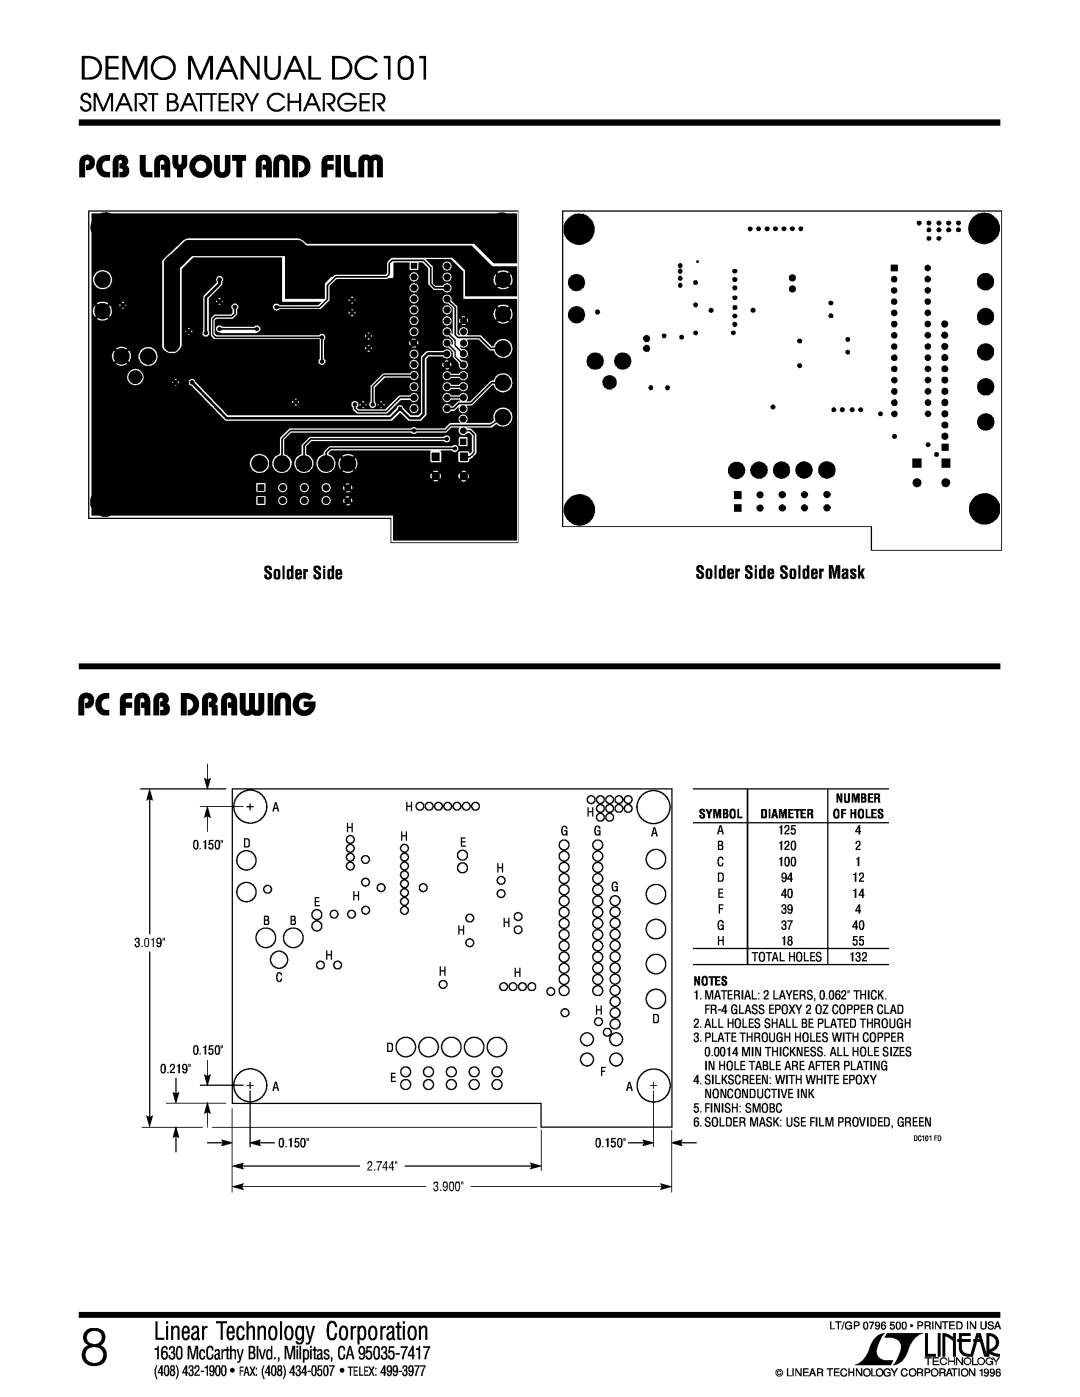 Linear Pc Fab Drawiug, DEMO MANUAL DC101, Pcb Layout Aud Filw, Smart Battery Charger, Linear Technology Corporation 